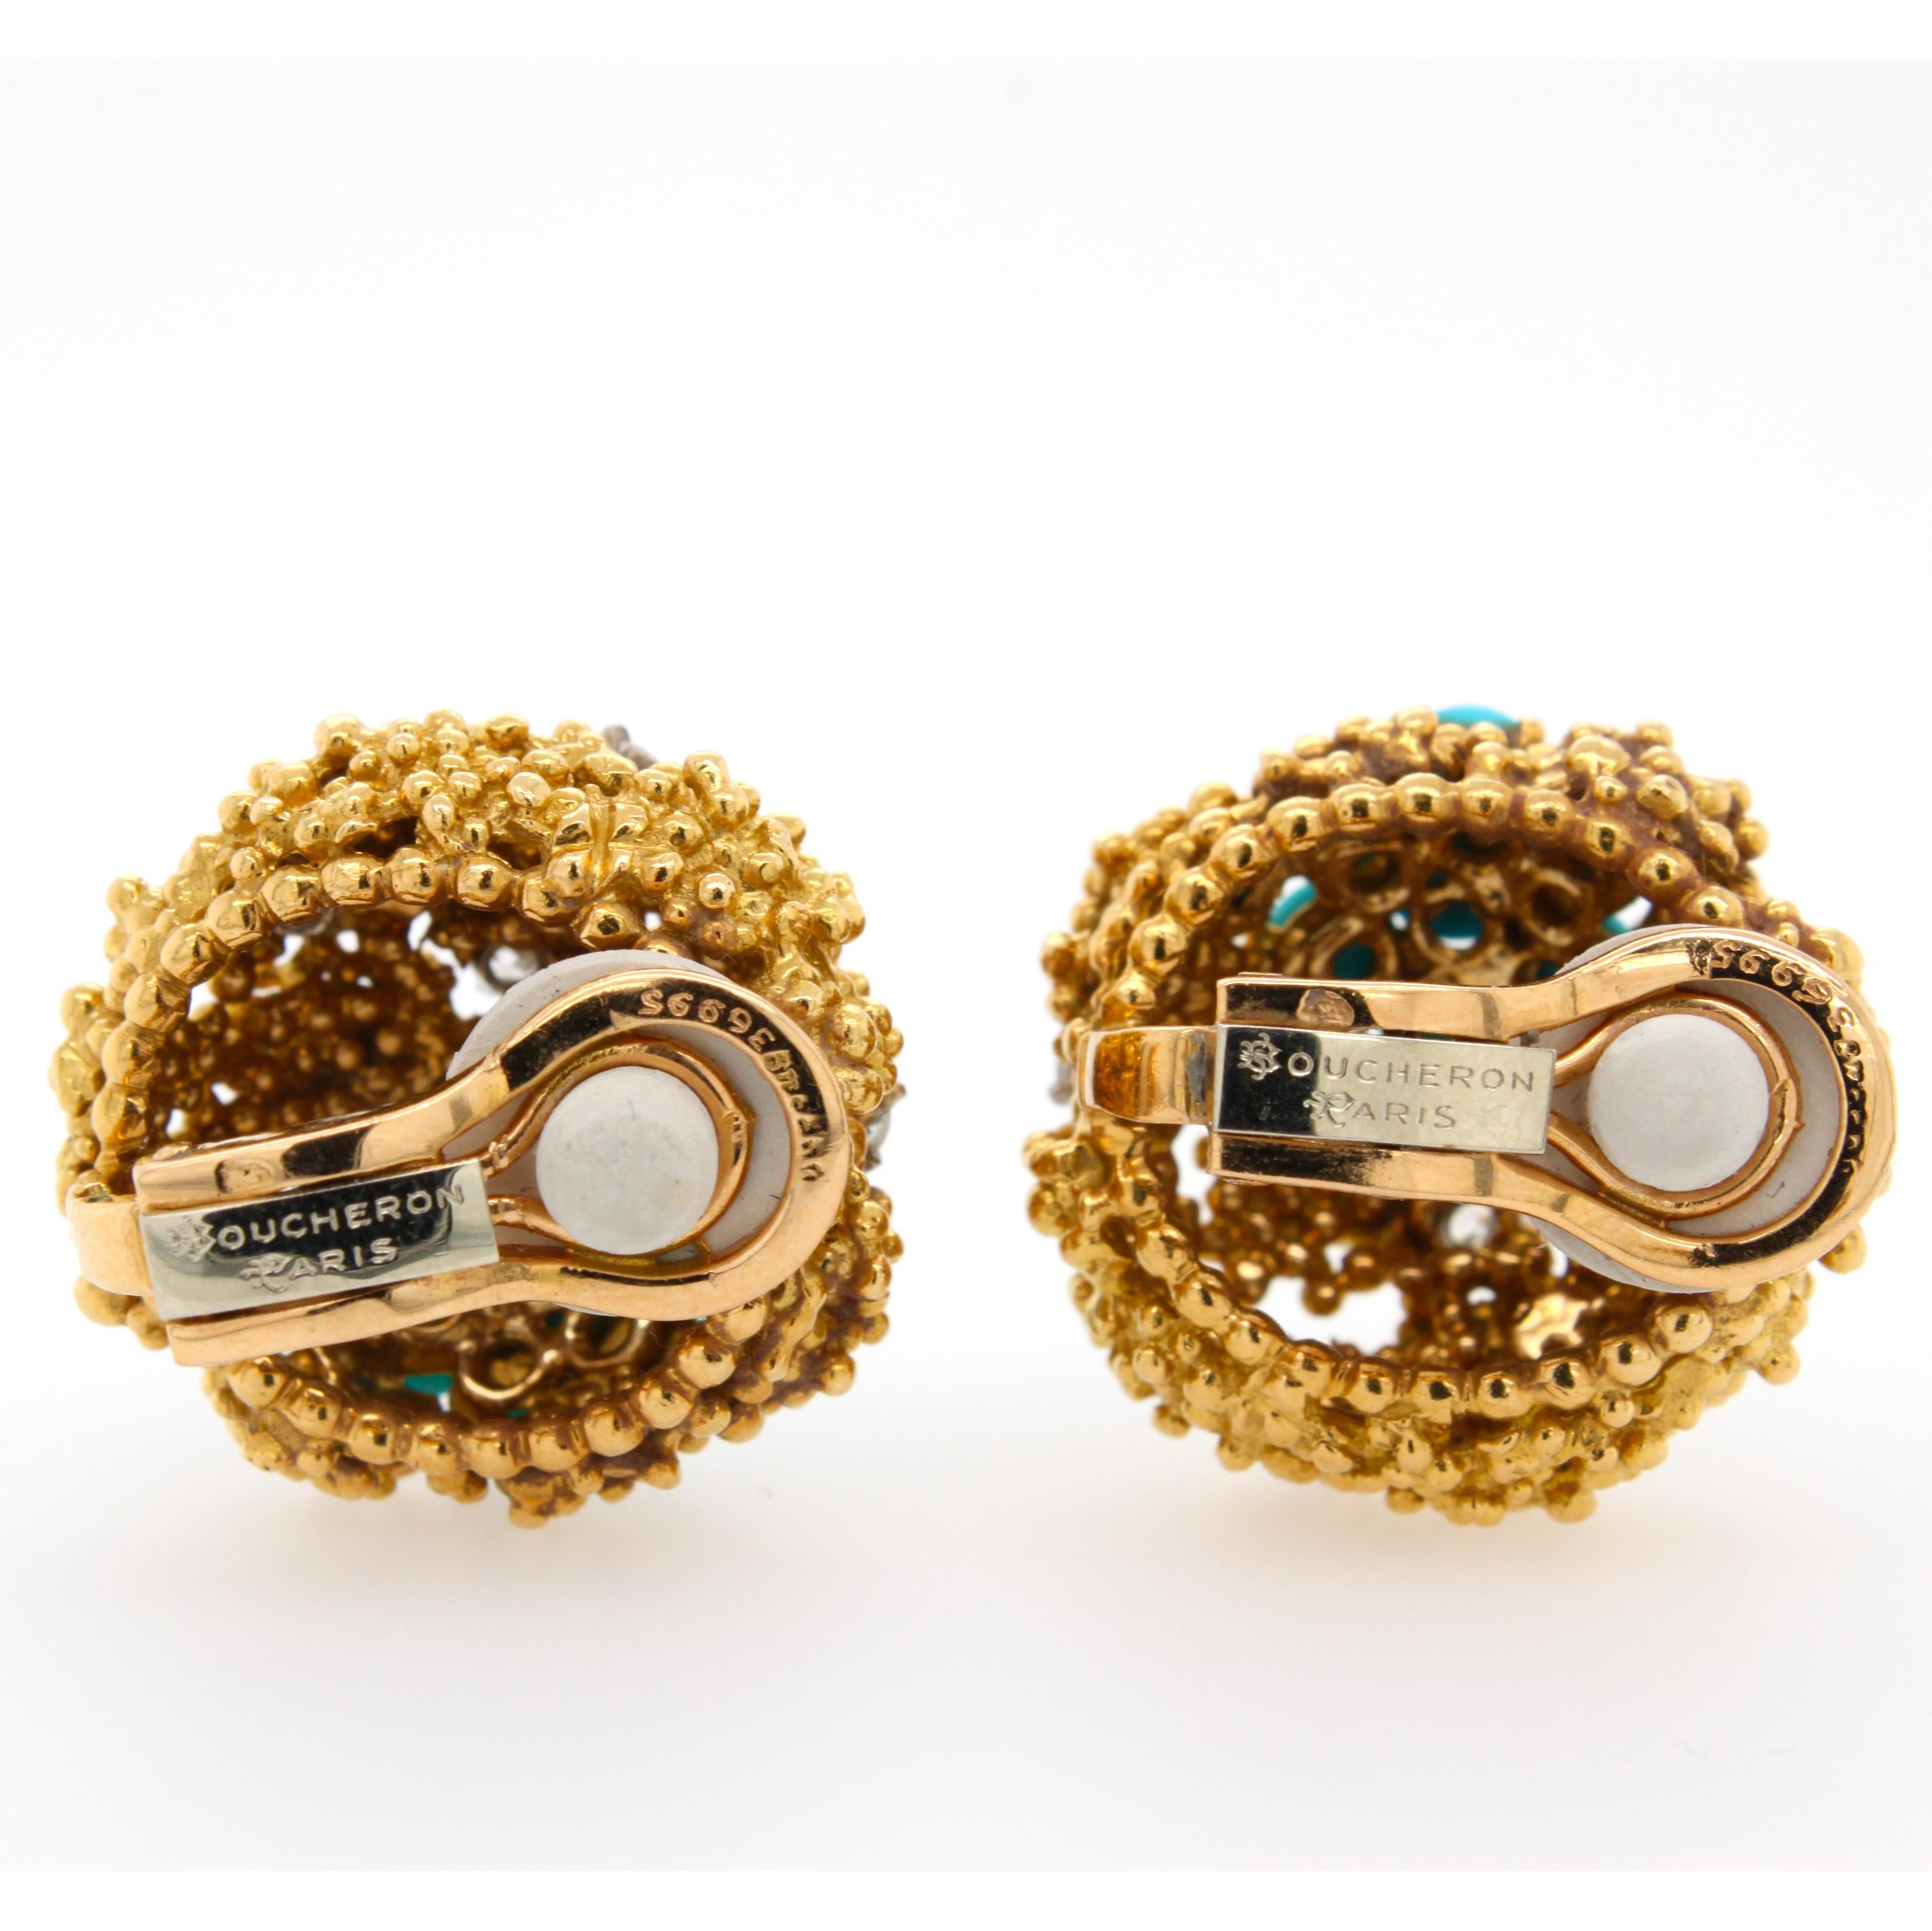 Round Cut Boucheron Turqouise and Diamond Gold Nugget Earrings, 1940s